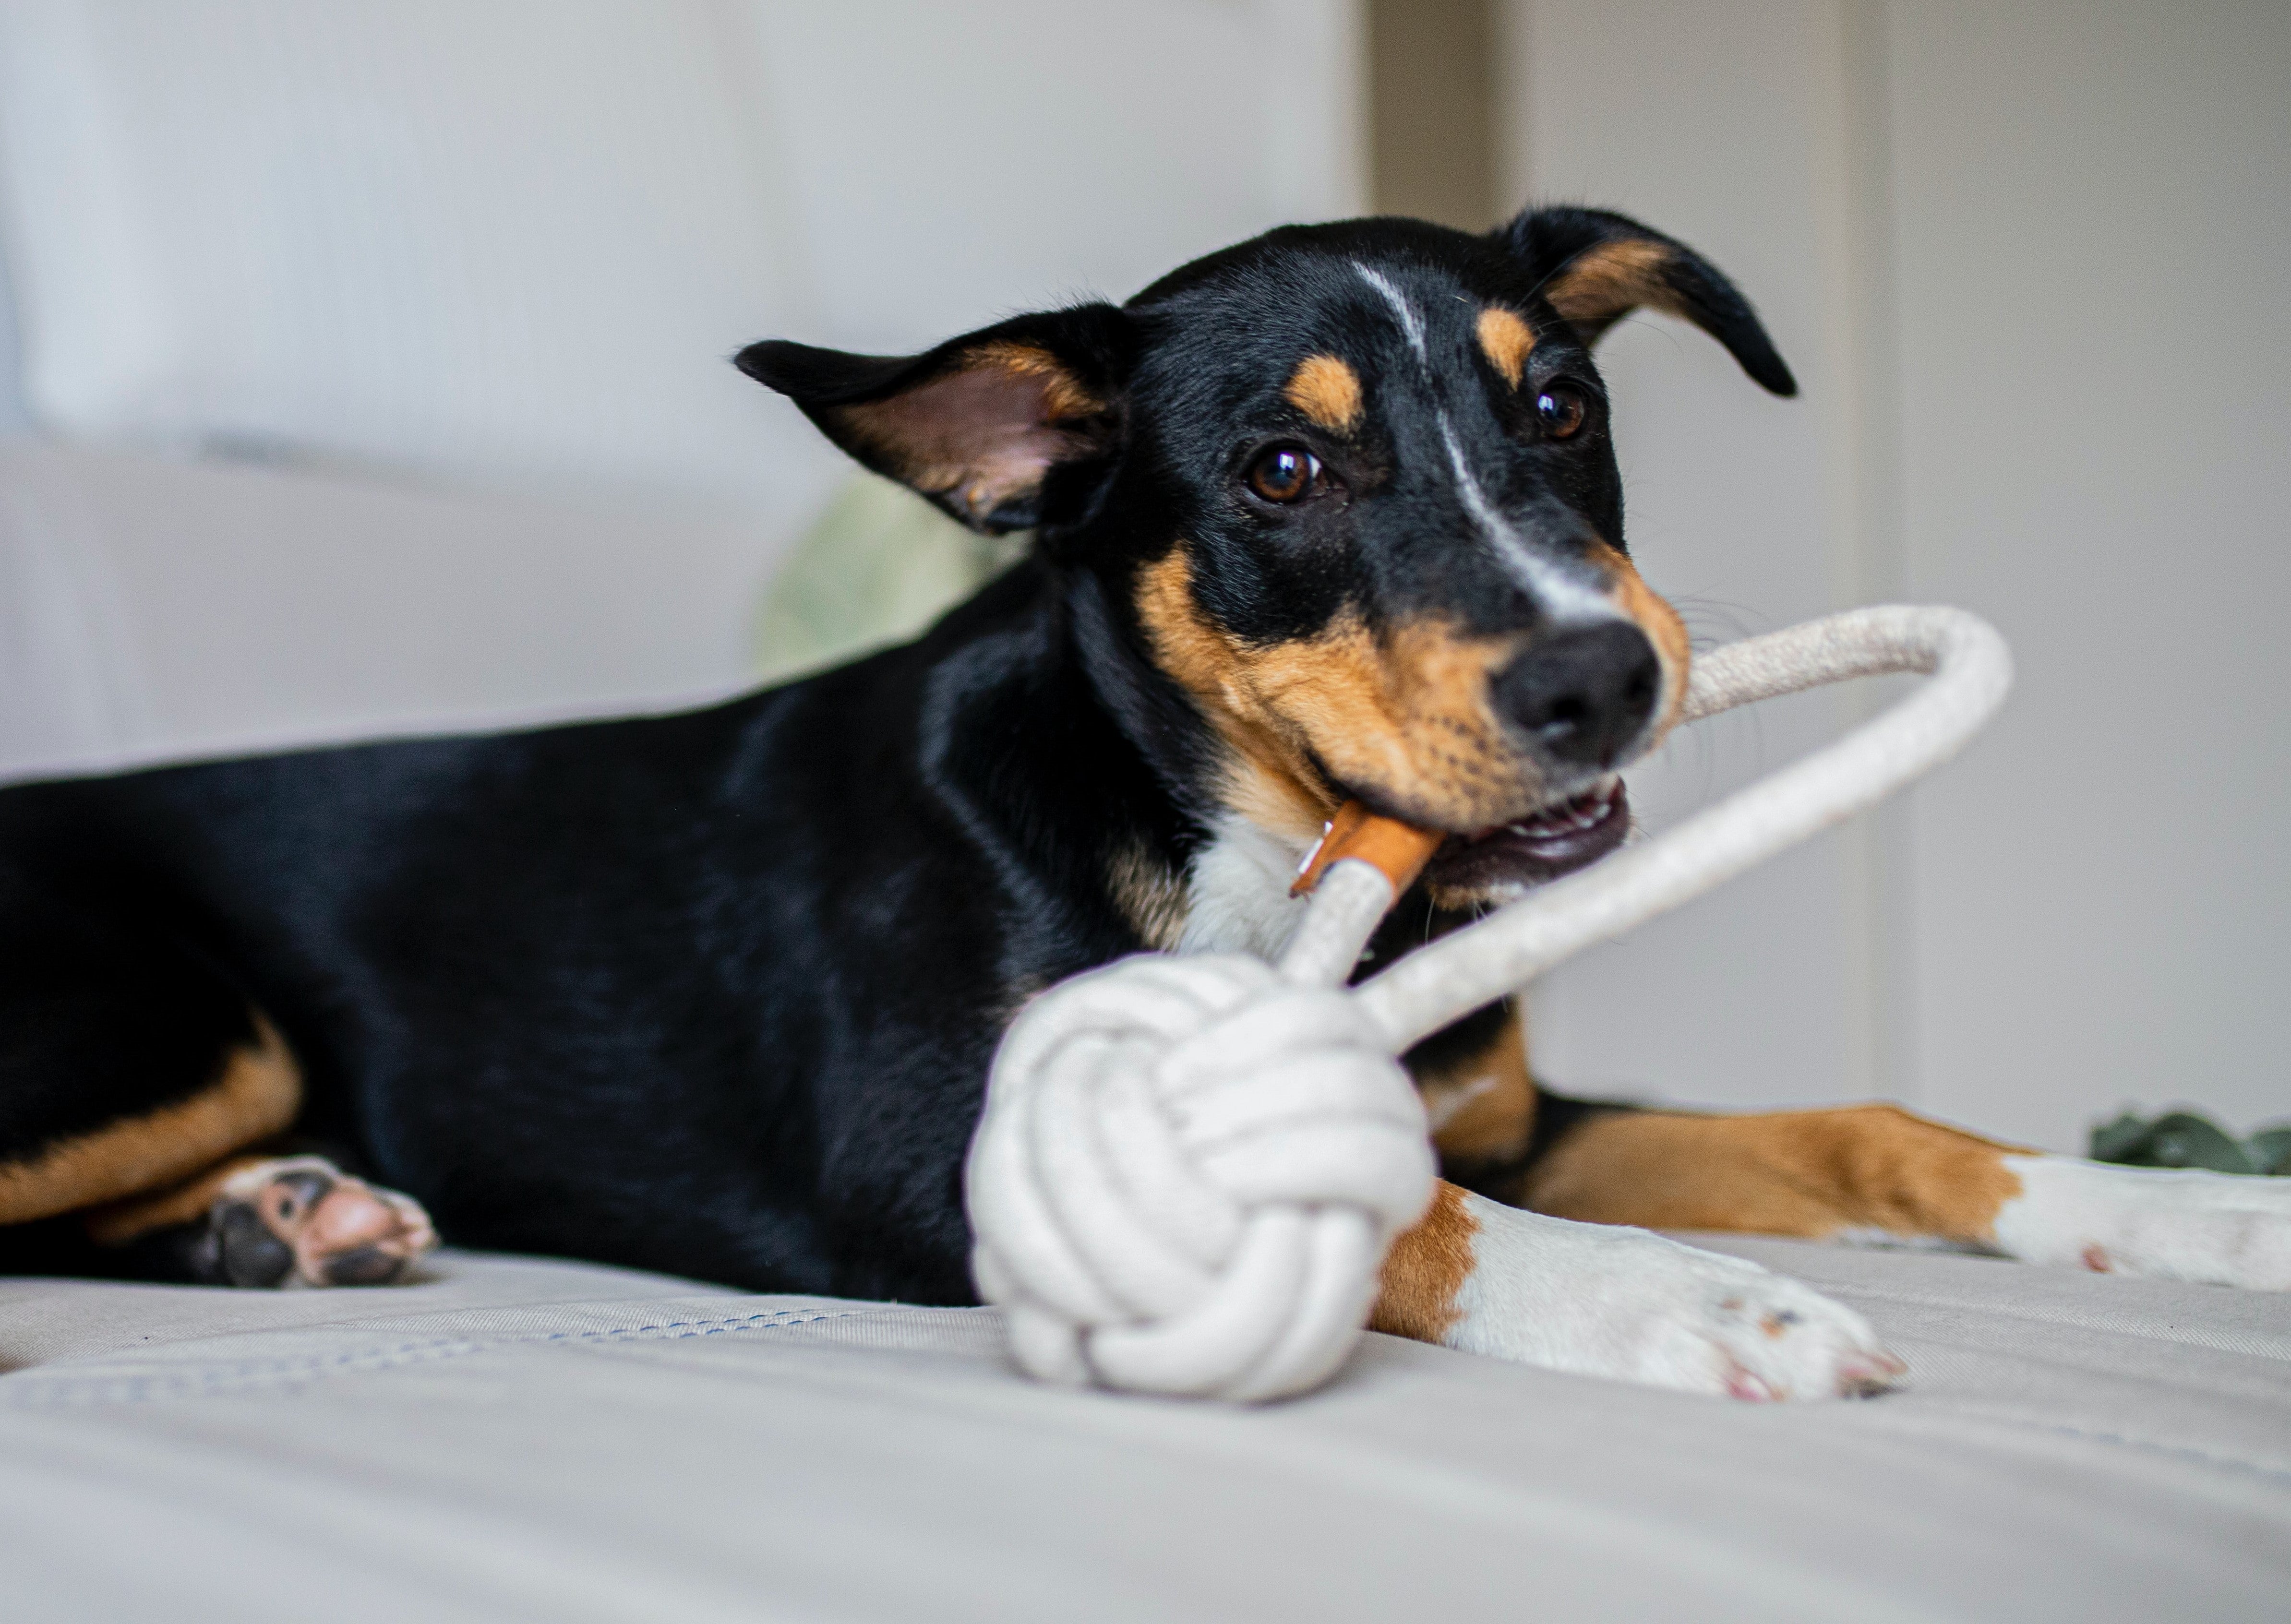 Do dogs get bored of their toys?